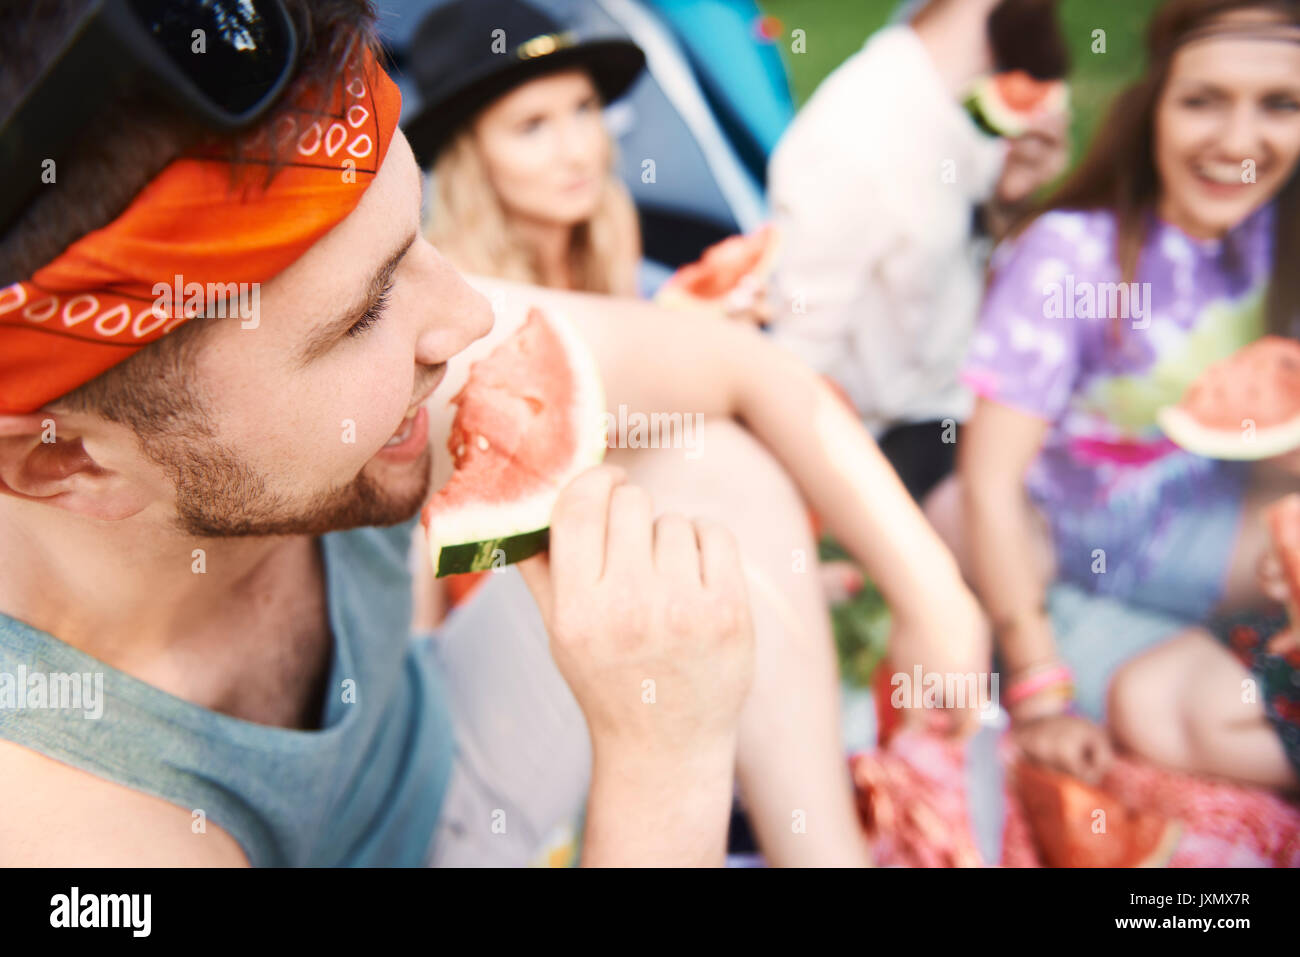 Young boho adult friends eating melon slices at festival Stock Photo